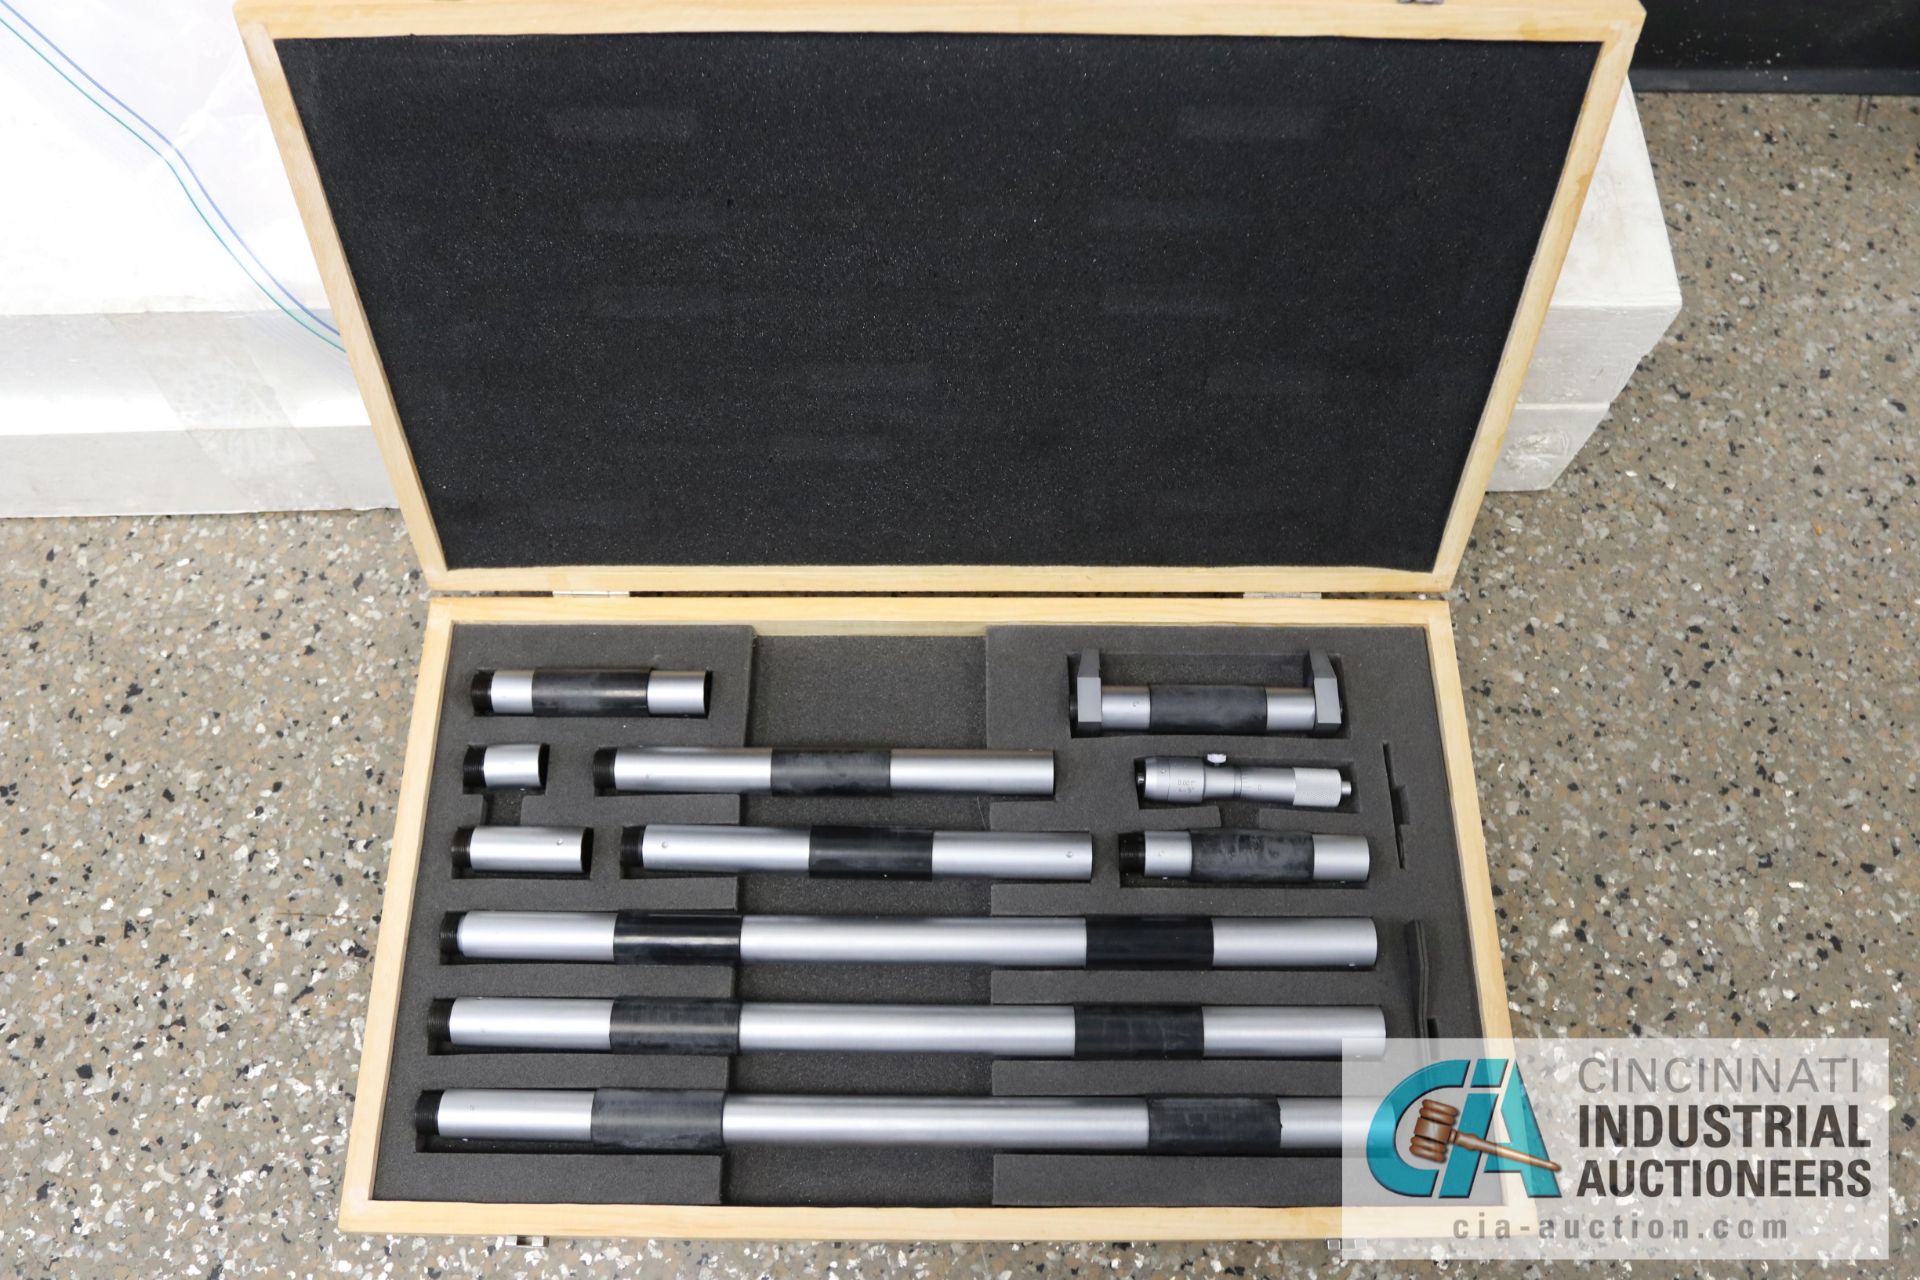 4" TO 80" FOWLER ID MICROMETER SET - Located in Holland, Ohio